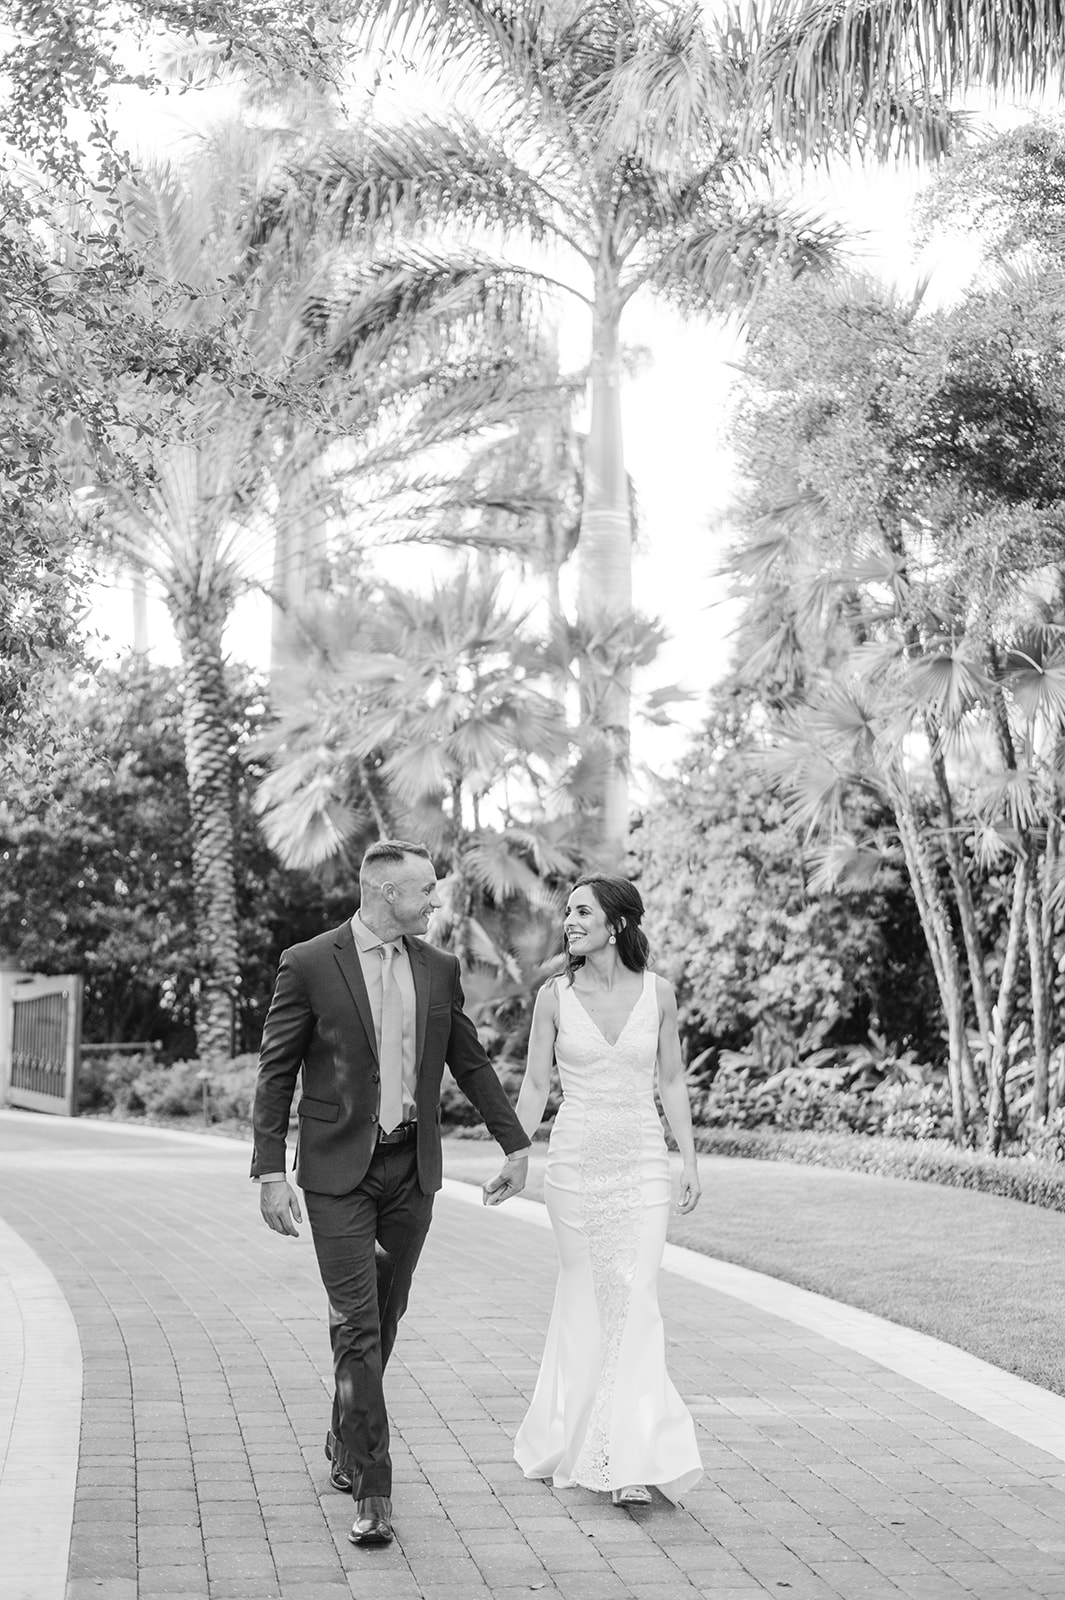 Naples Florida wedding photographer captures the bride and her mother sharing a moment
